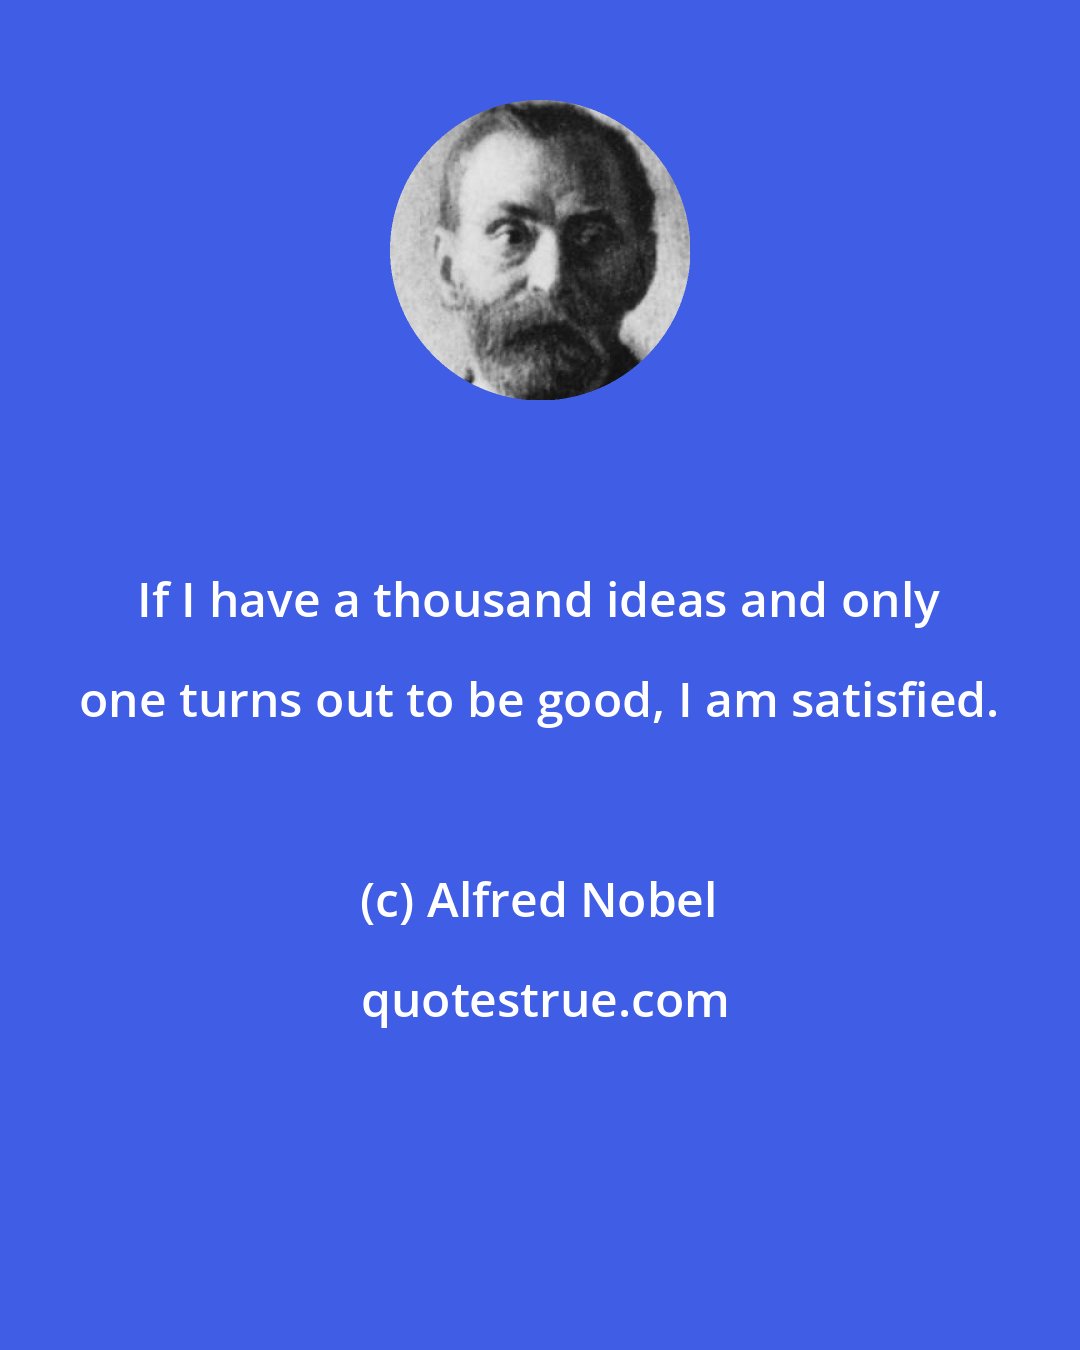 Alfred Nobel: If I have a thousand ideas and only one turns out to be good, I am satisfied.